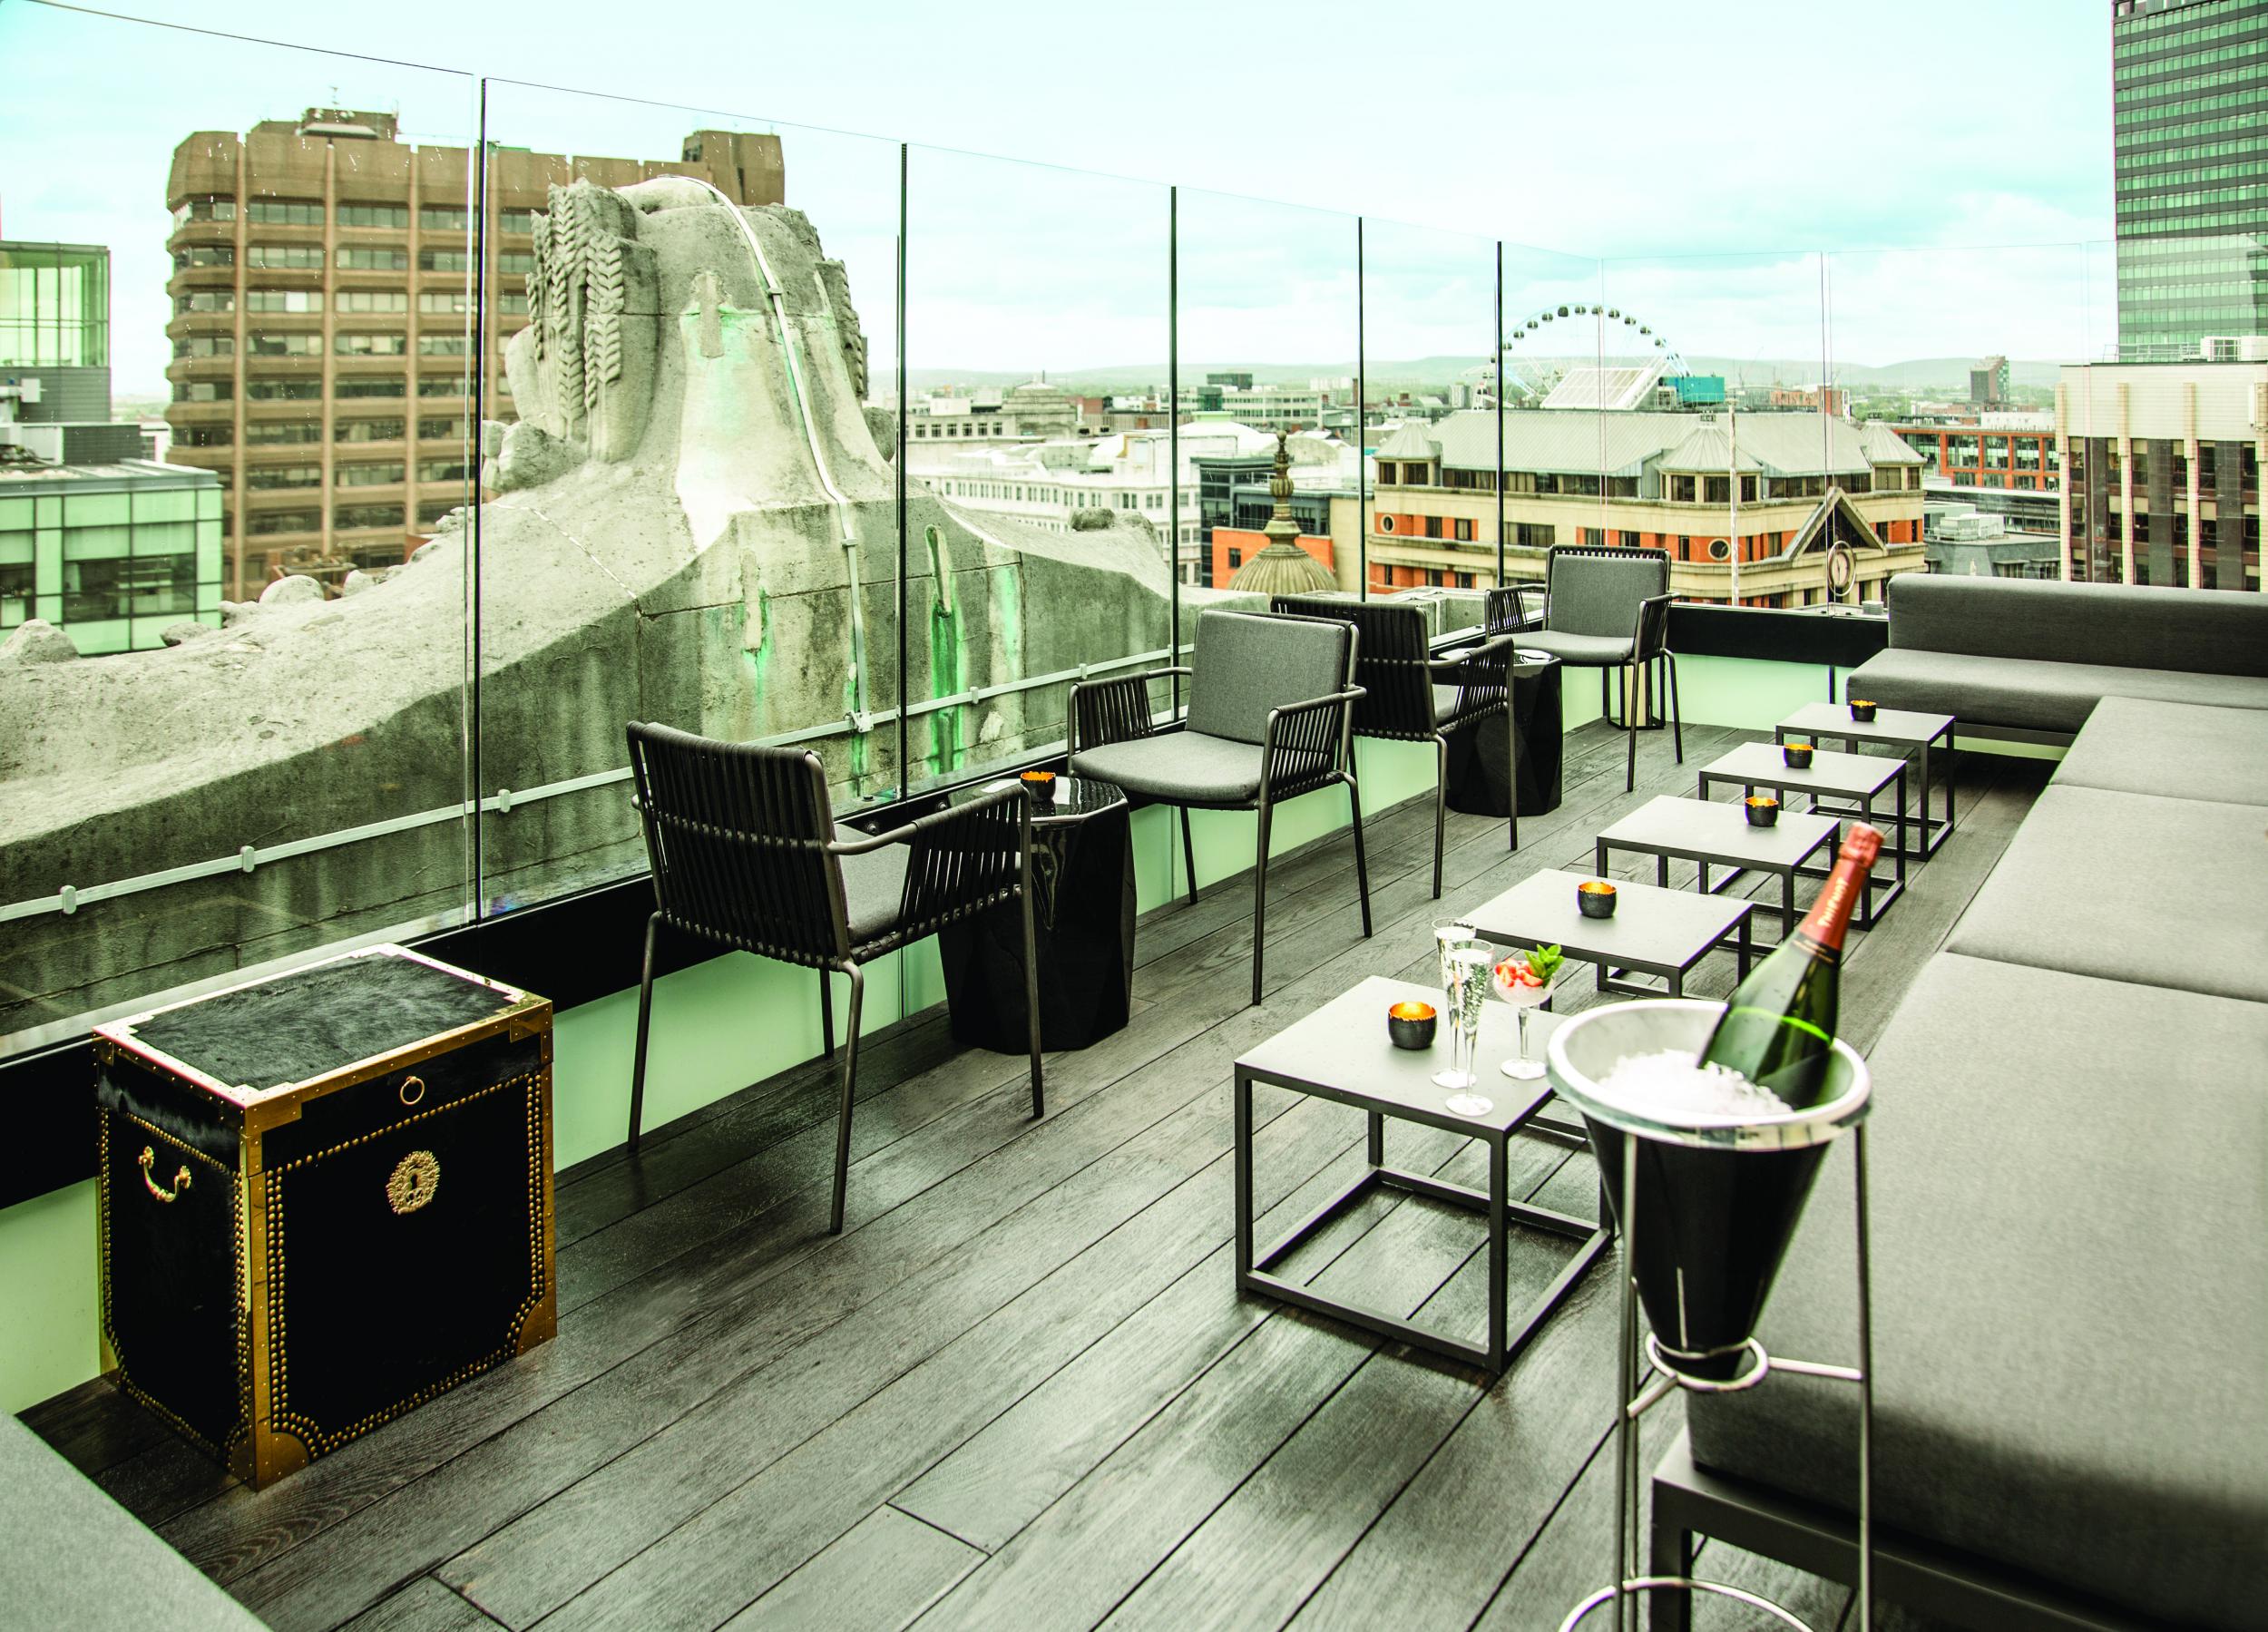 Enjoy superb views of the city from the roof terrace at Hotel Gotham